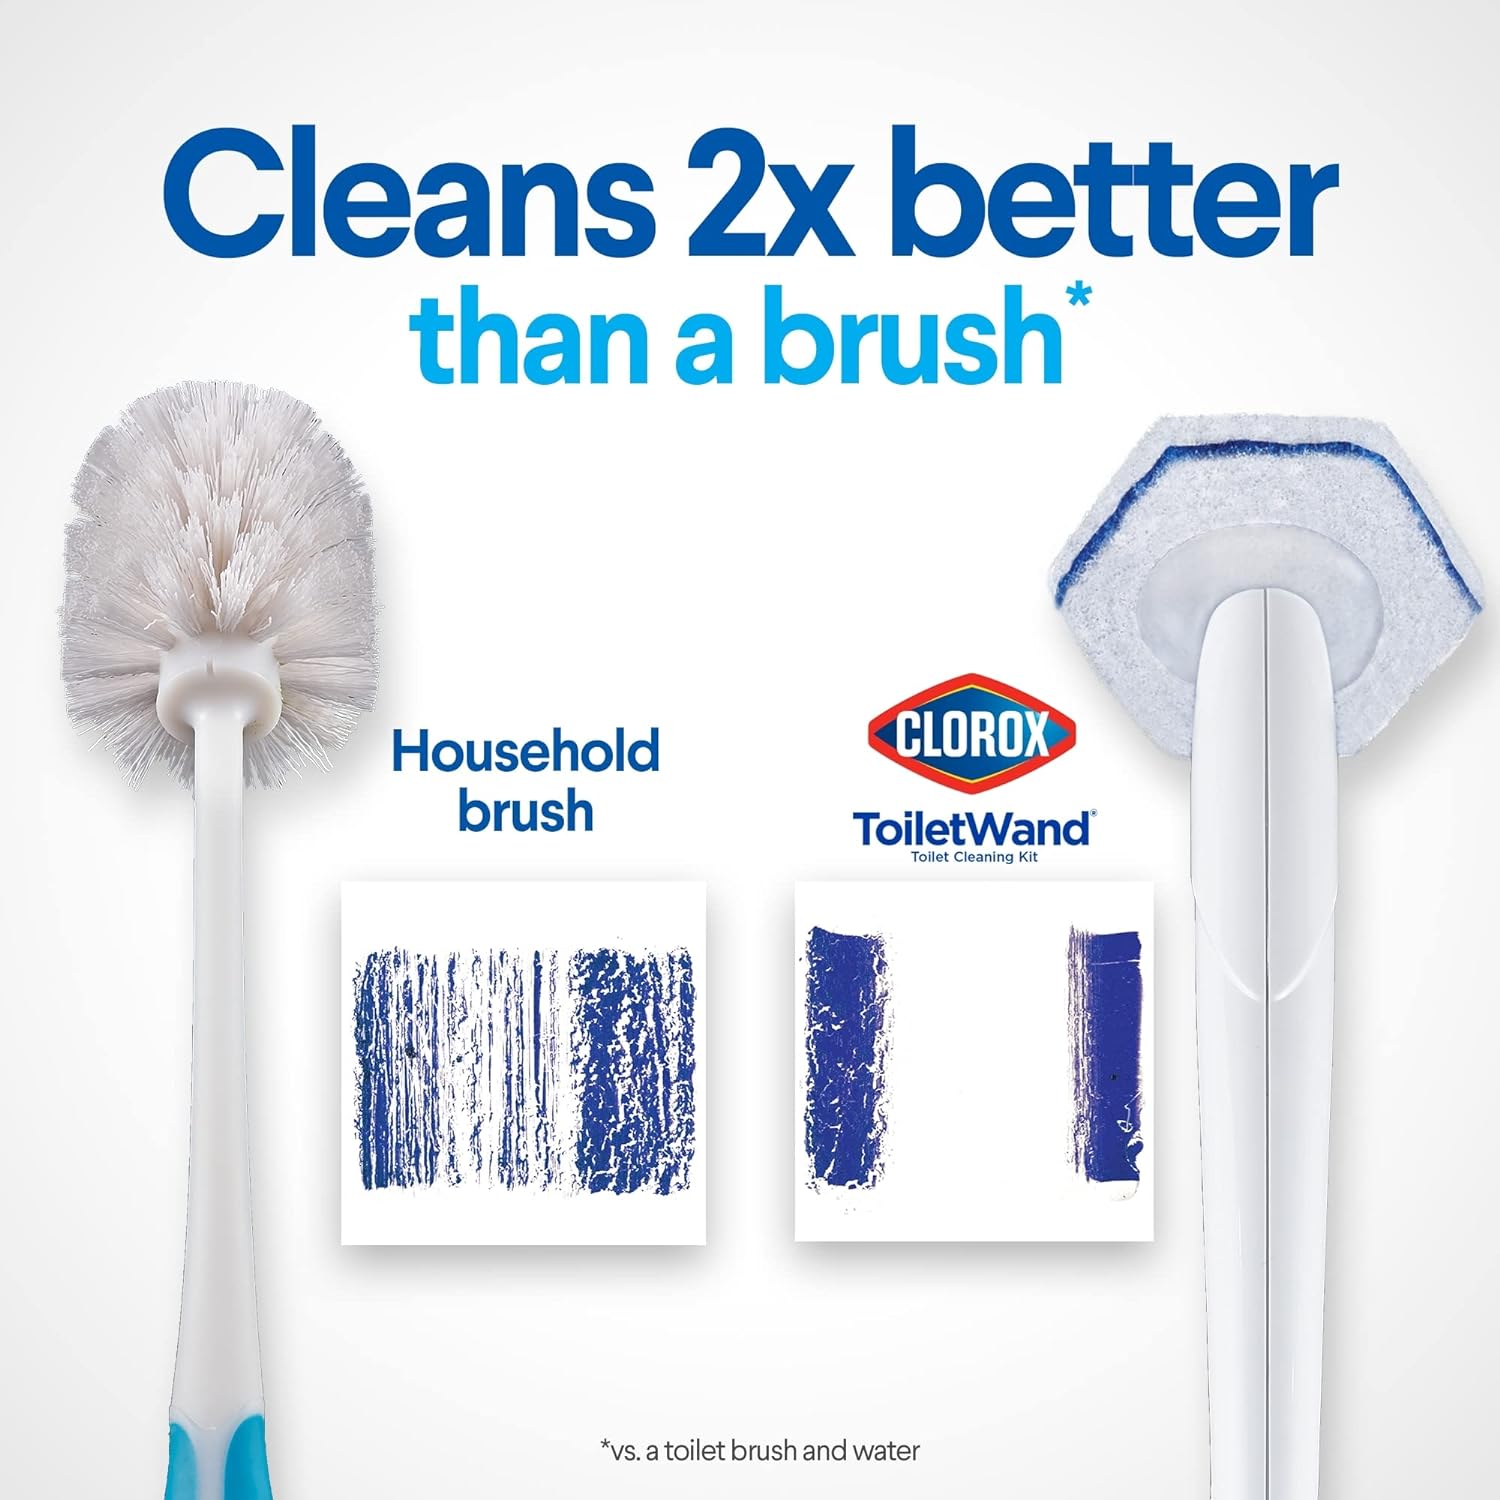 Clorox ToiletWand Disposable Toilet Cleaning Kit, Brush, Bathroom Cleaning System with Storage Caddy and 6 Disinfecting Refill Heads (Package May Vary)